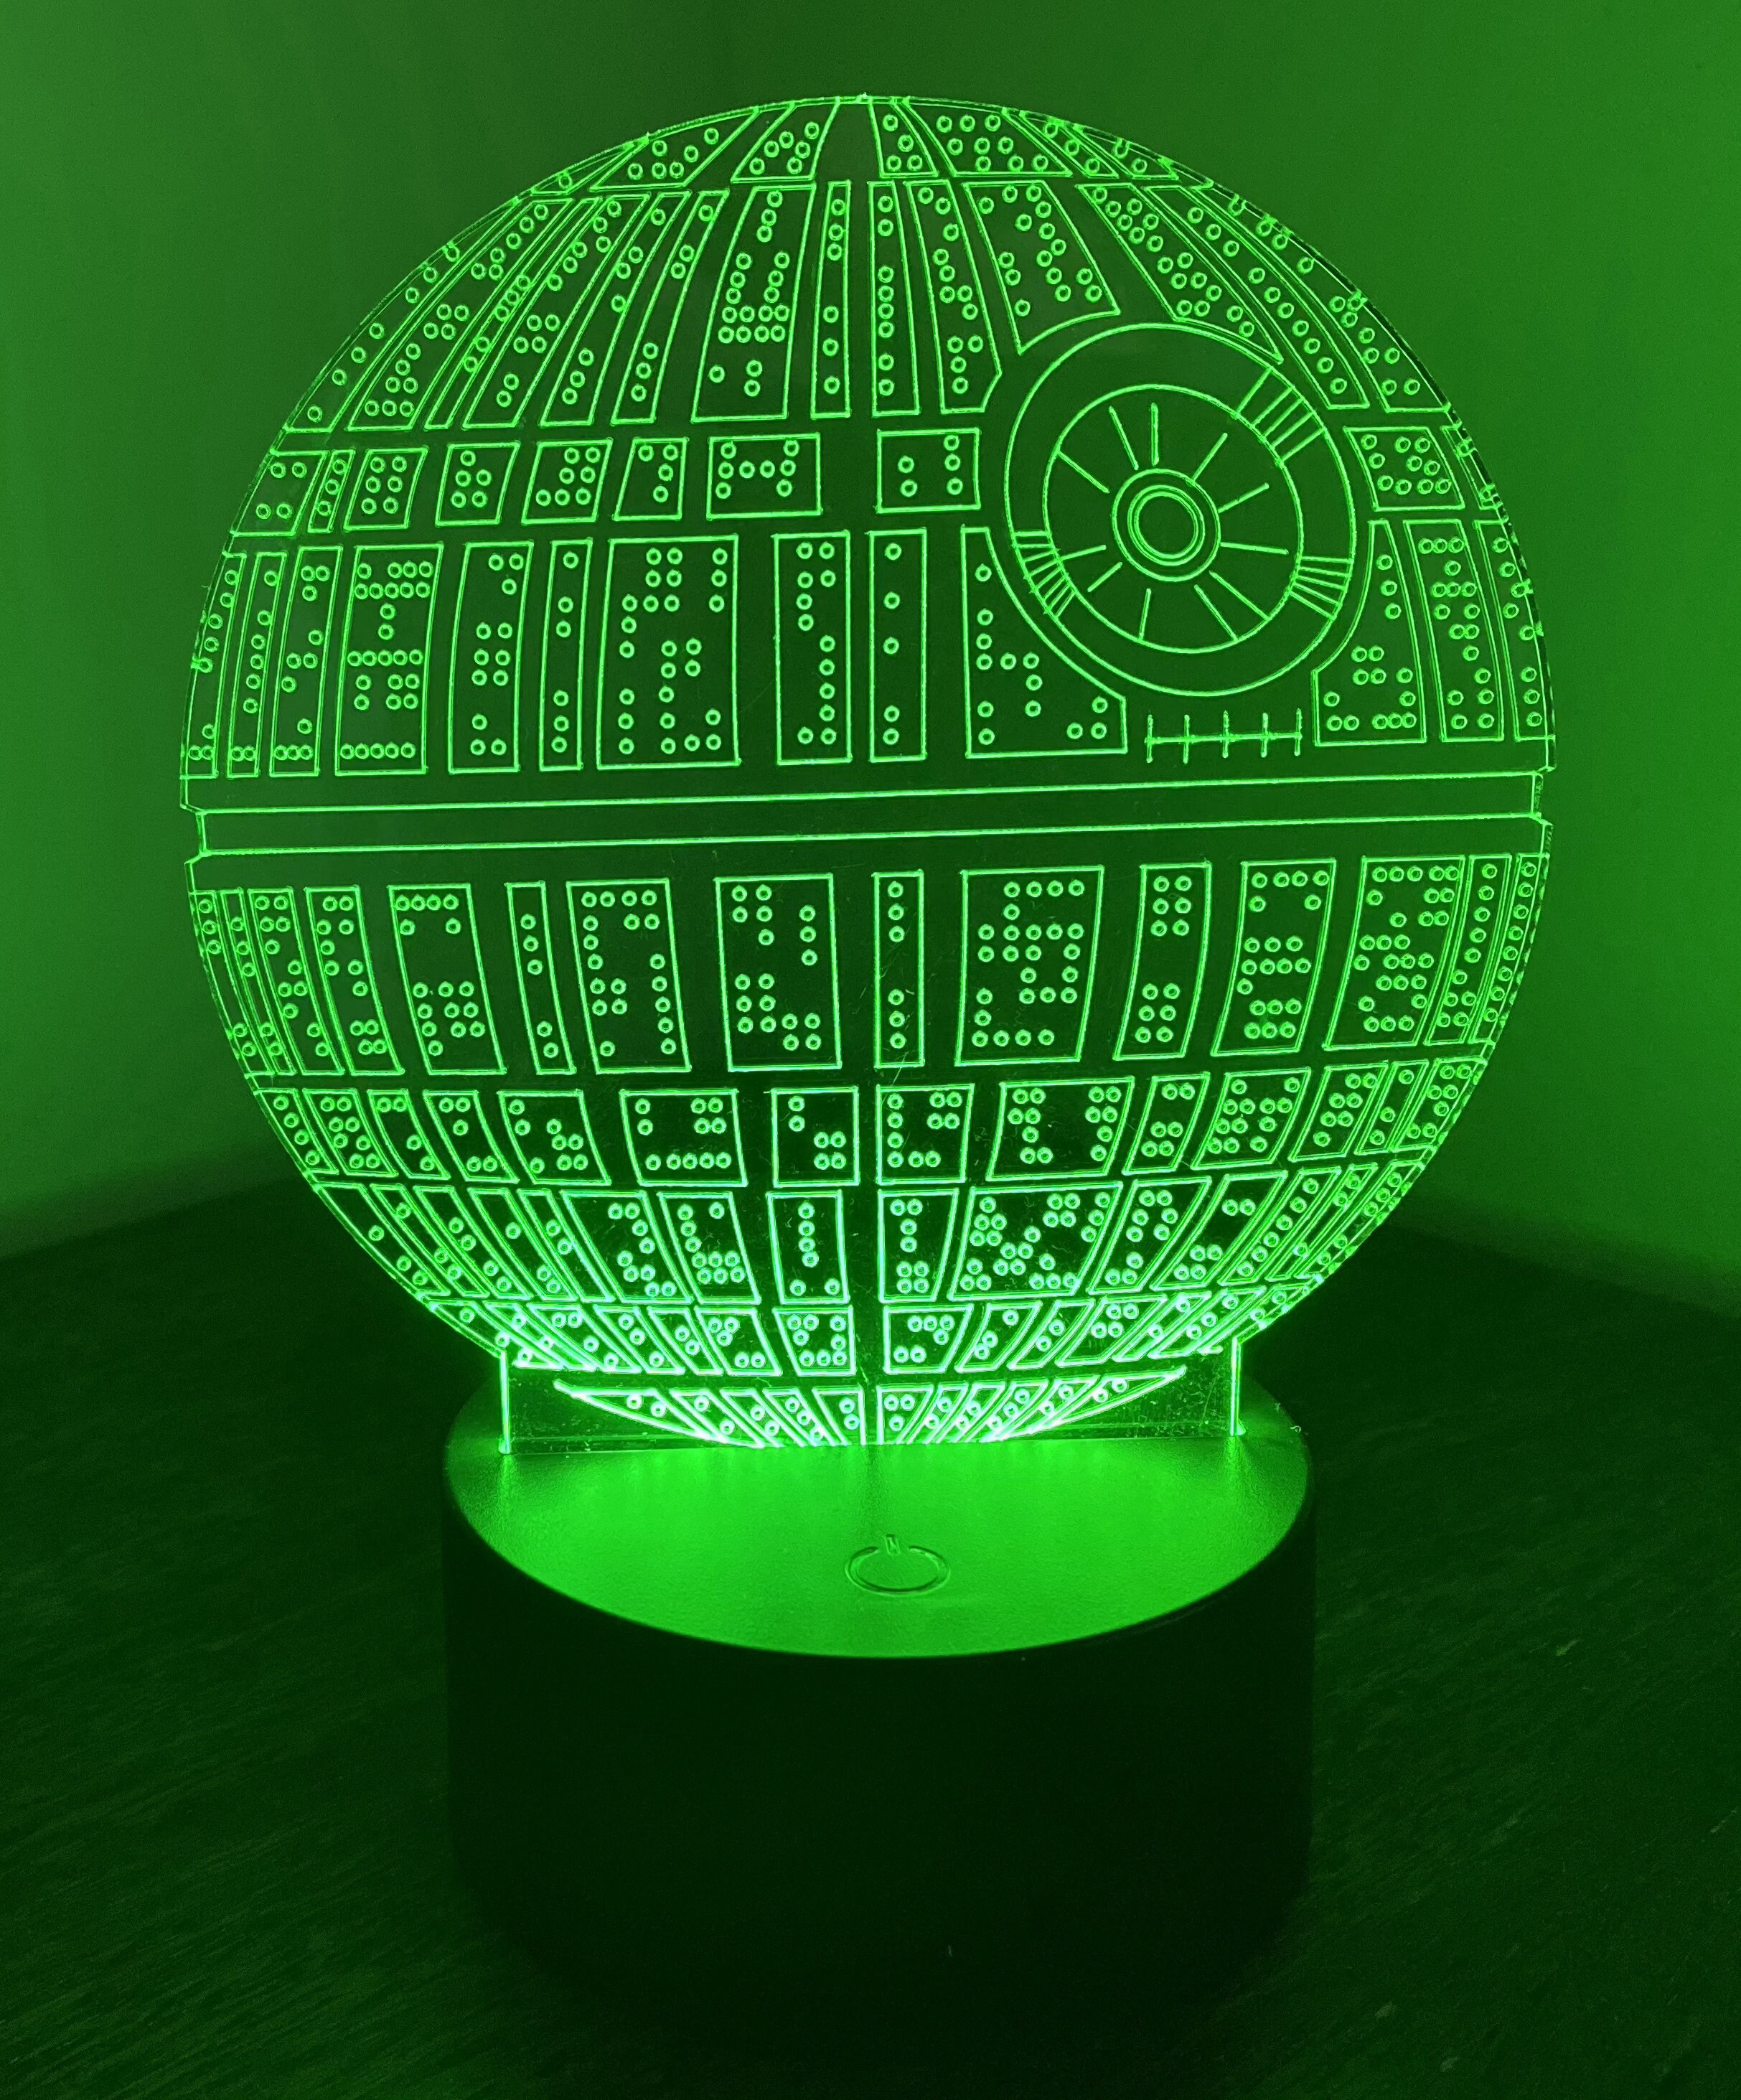 STAR WARS 3D LED BATTERY USB NIGHT LIGHT REMOTE CONTROL  7 COLOUR DEATH STAR 